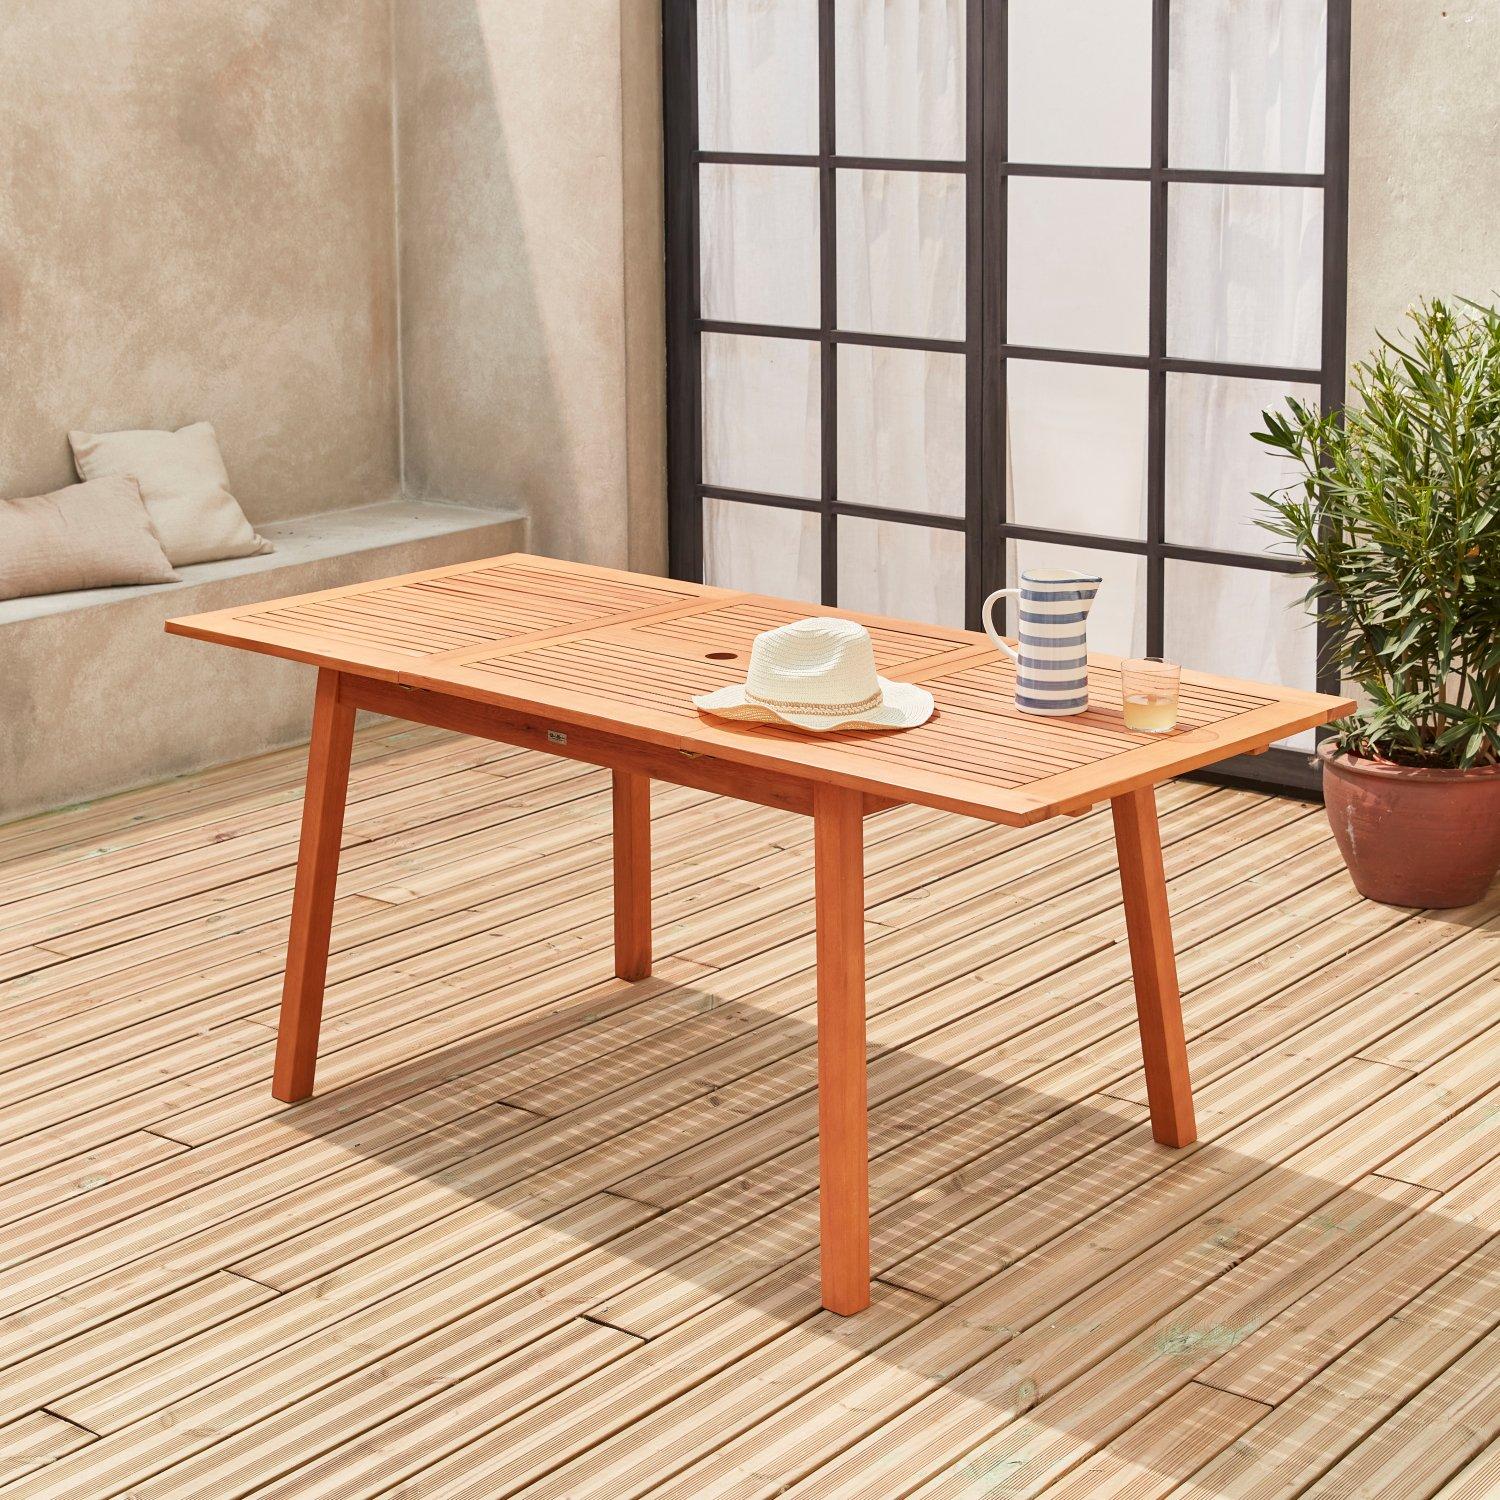 6 To 8-seater Extendable Wooden Garden Table